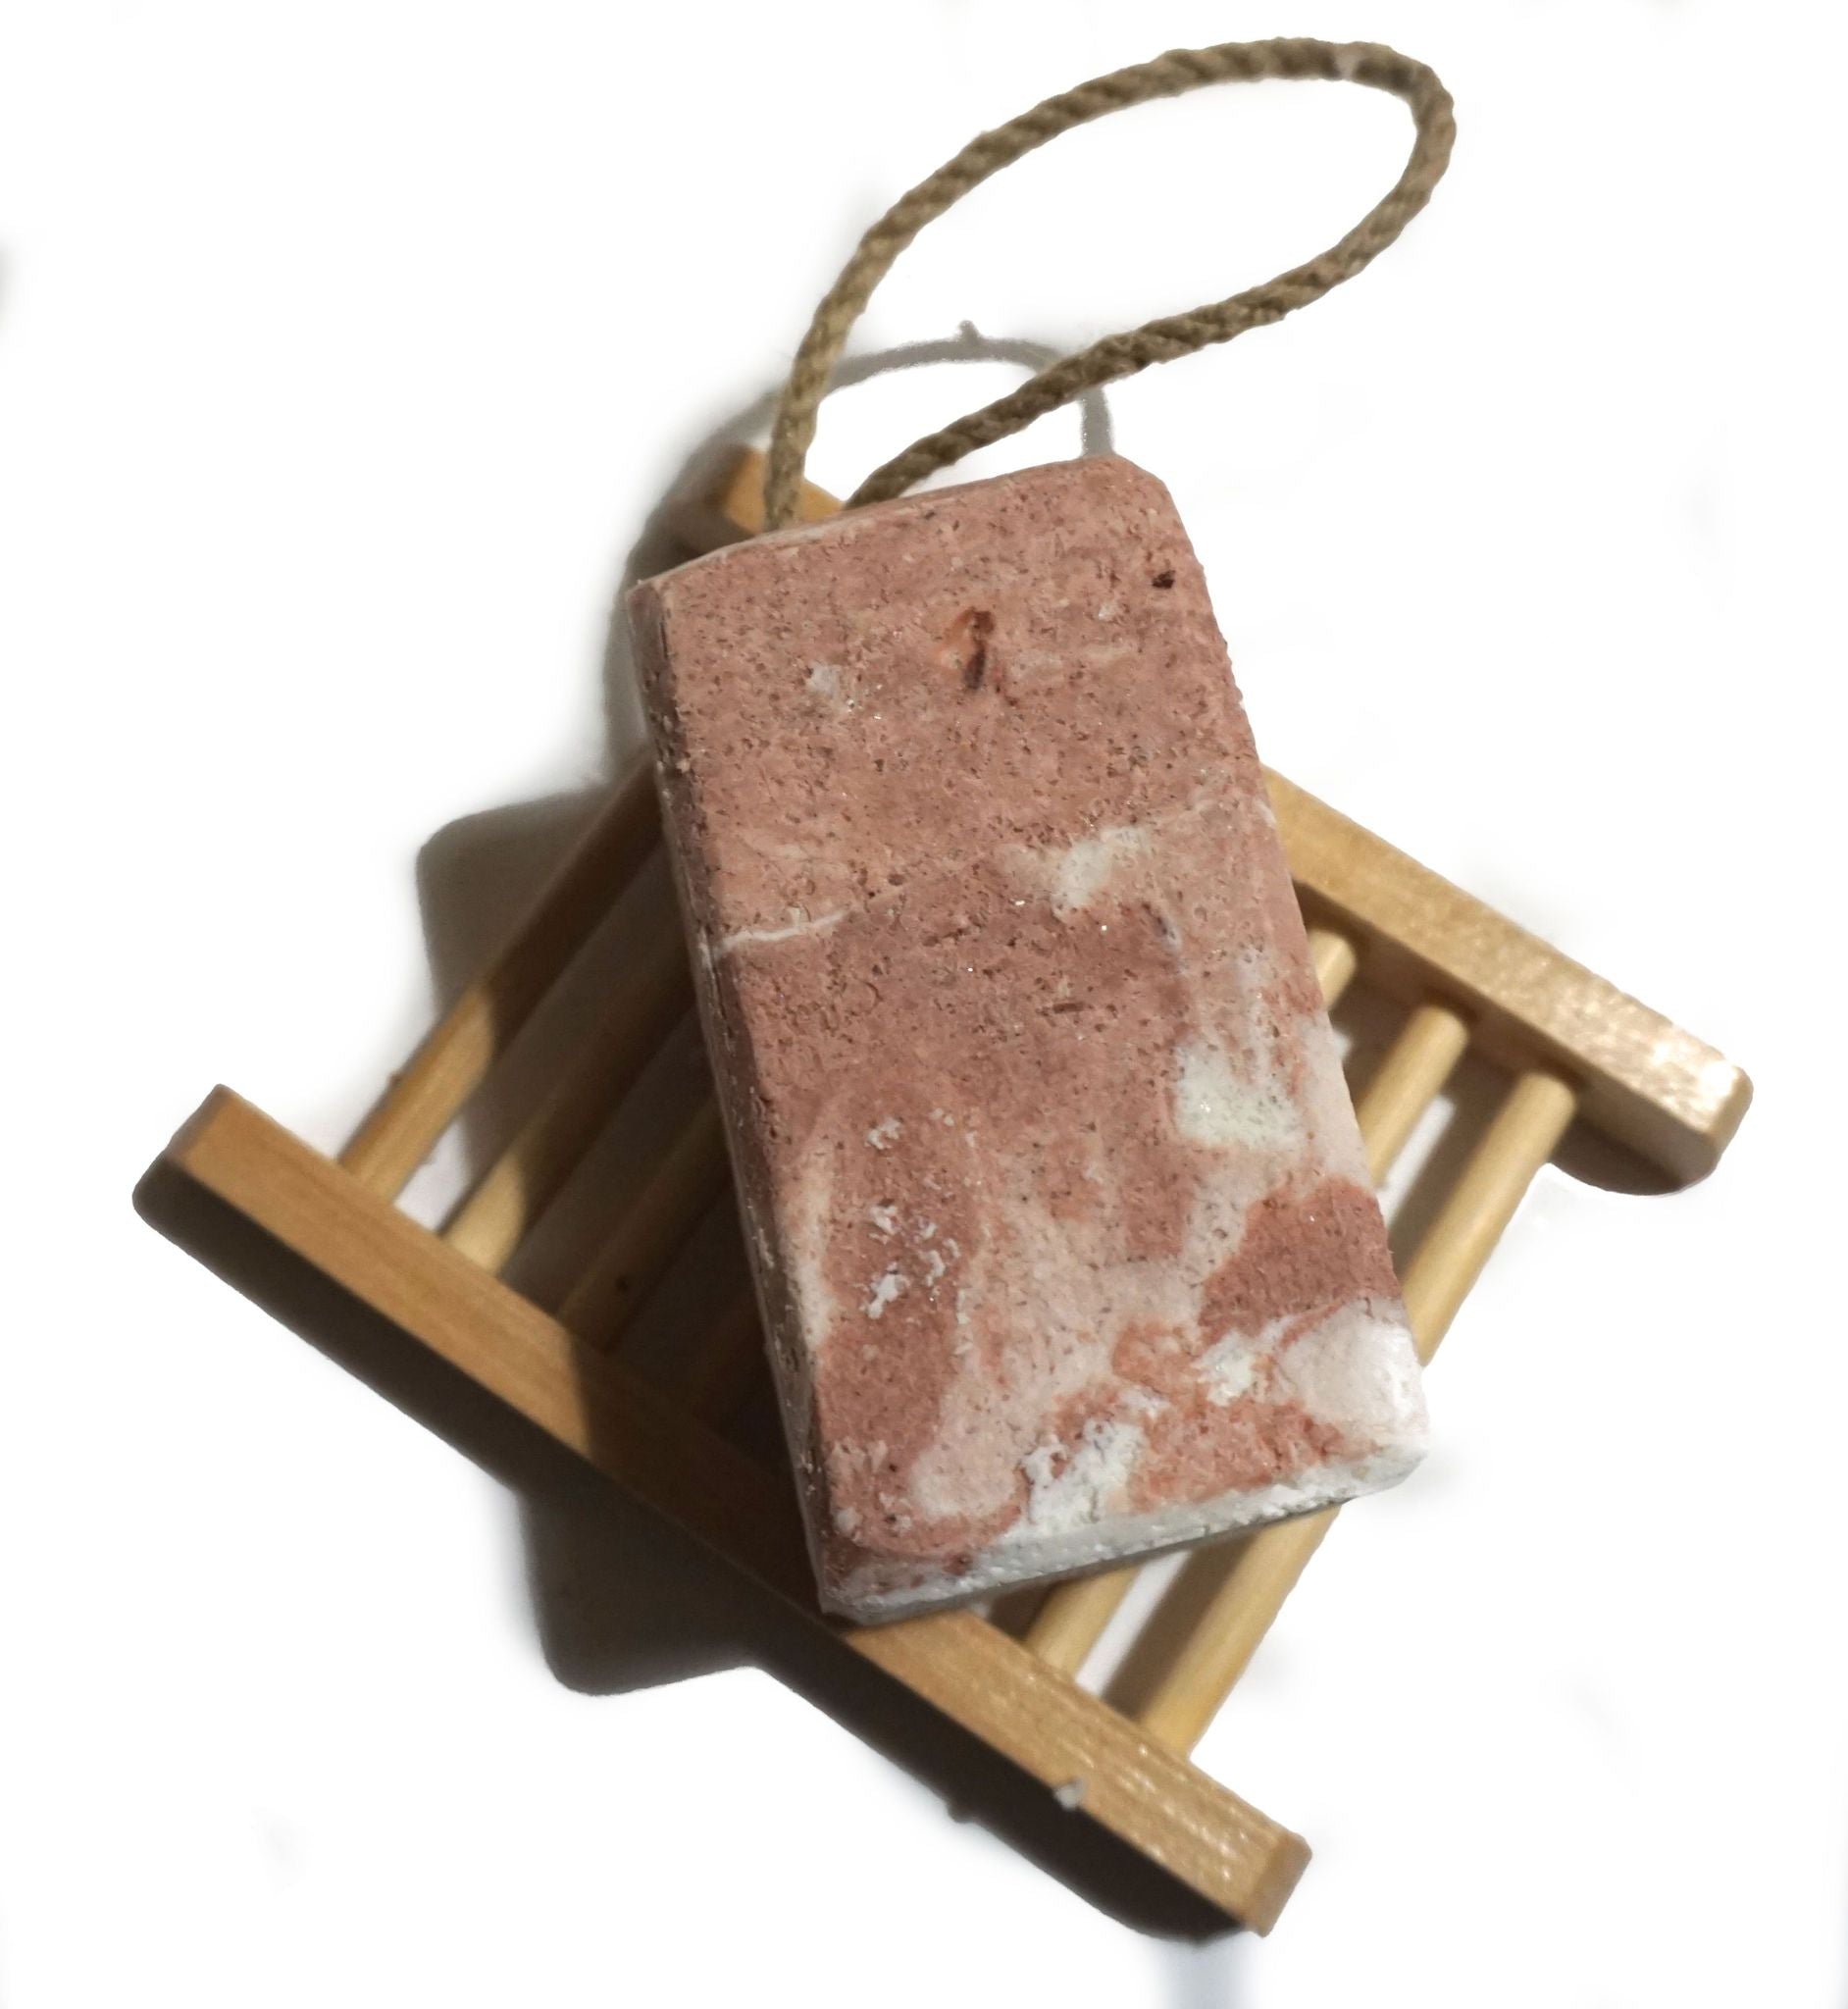 Himalayan Soap on a Rope from Pixi Daisy